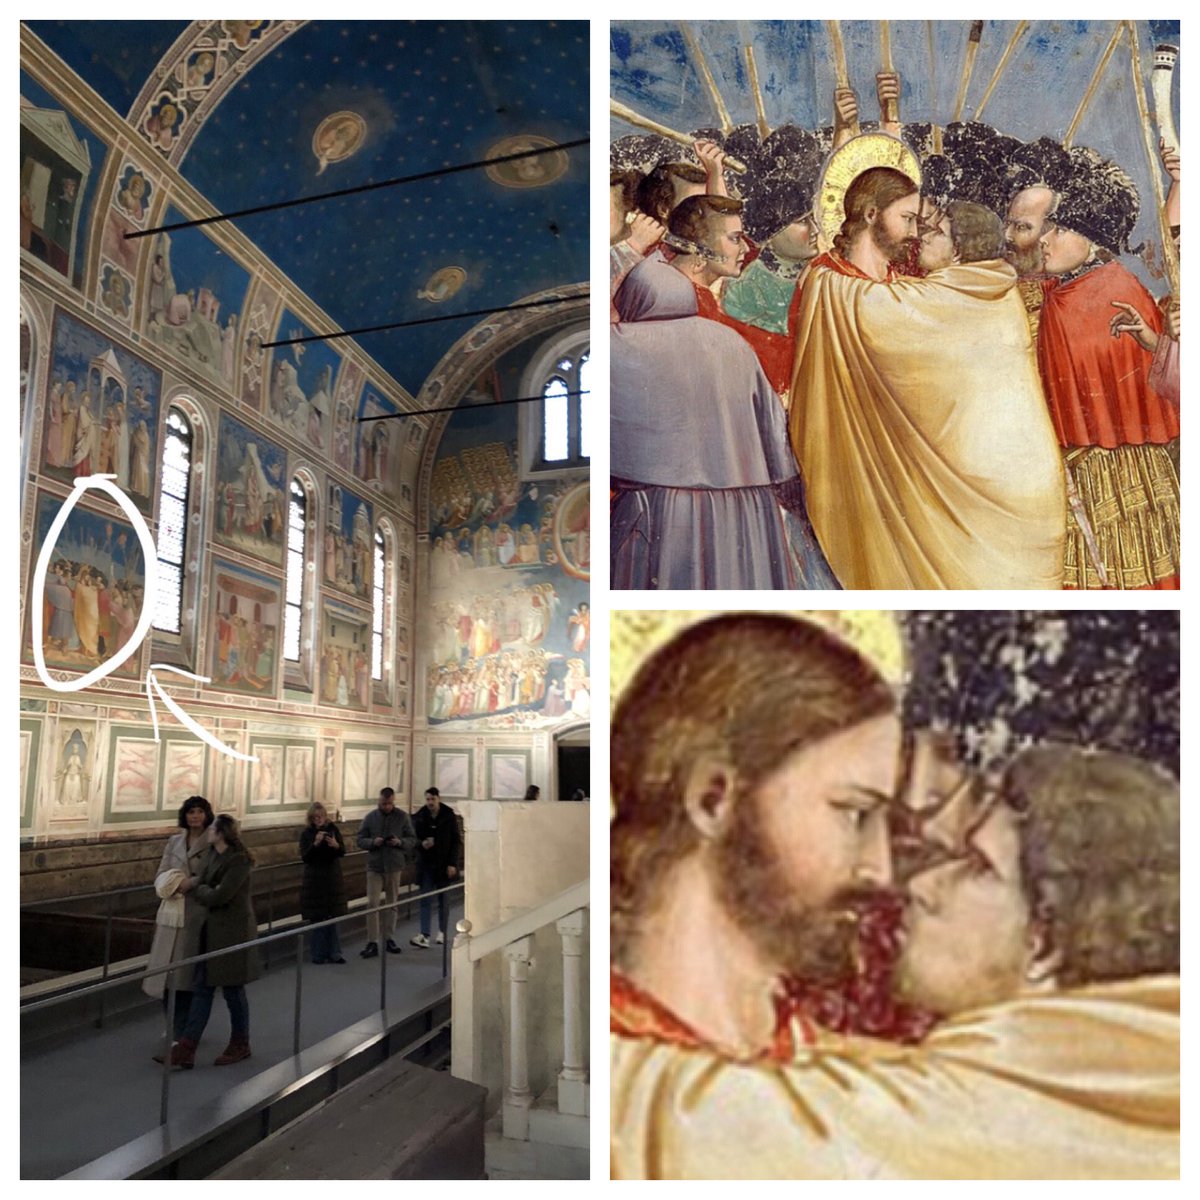 For the day that’s in it: ‘Kiss of Judas’ - one of Giotto’s most iconic frescoes in the Scrovegni Chapel in Padua, Italy, painted 720 years ago, and one of the most exquisite works of human expression I have had the pleasure of viewing.